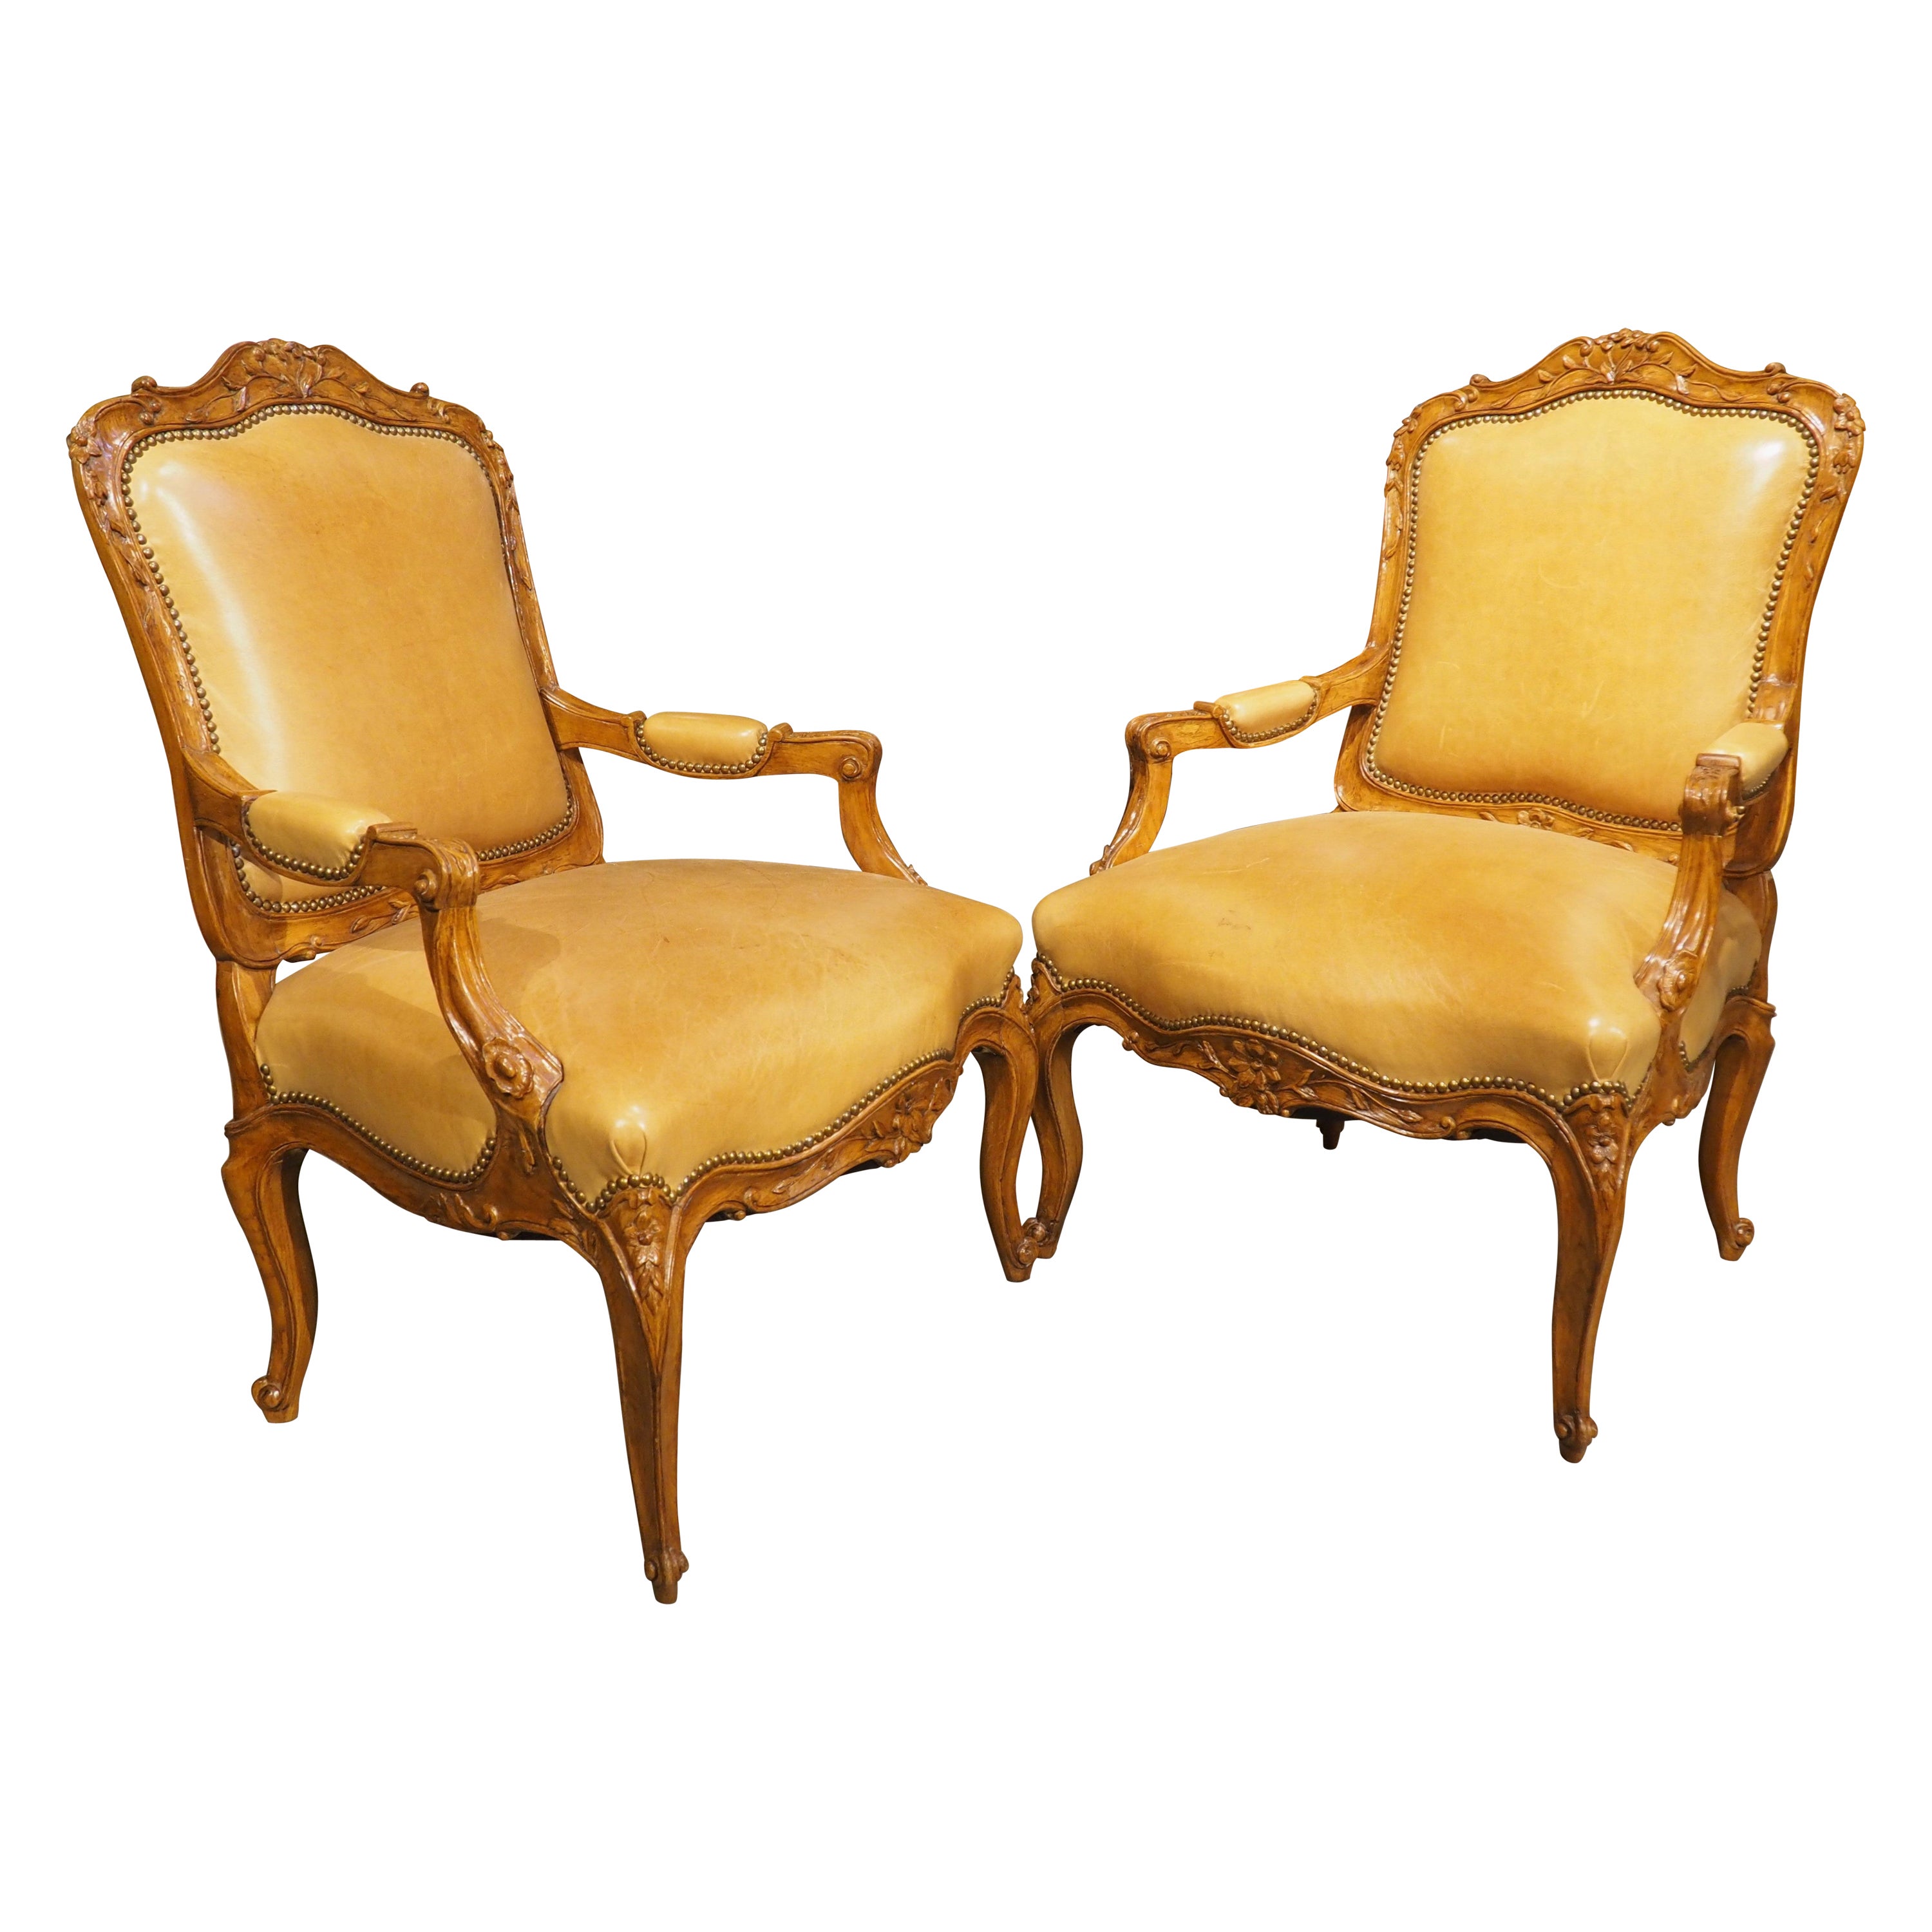 Pair of French Carved Regence Style Armchairs with Leather Upholstery, C. 1900